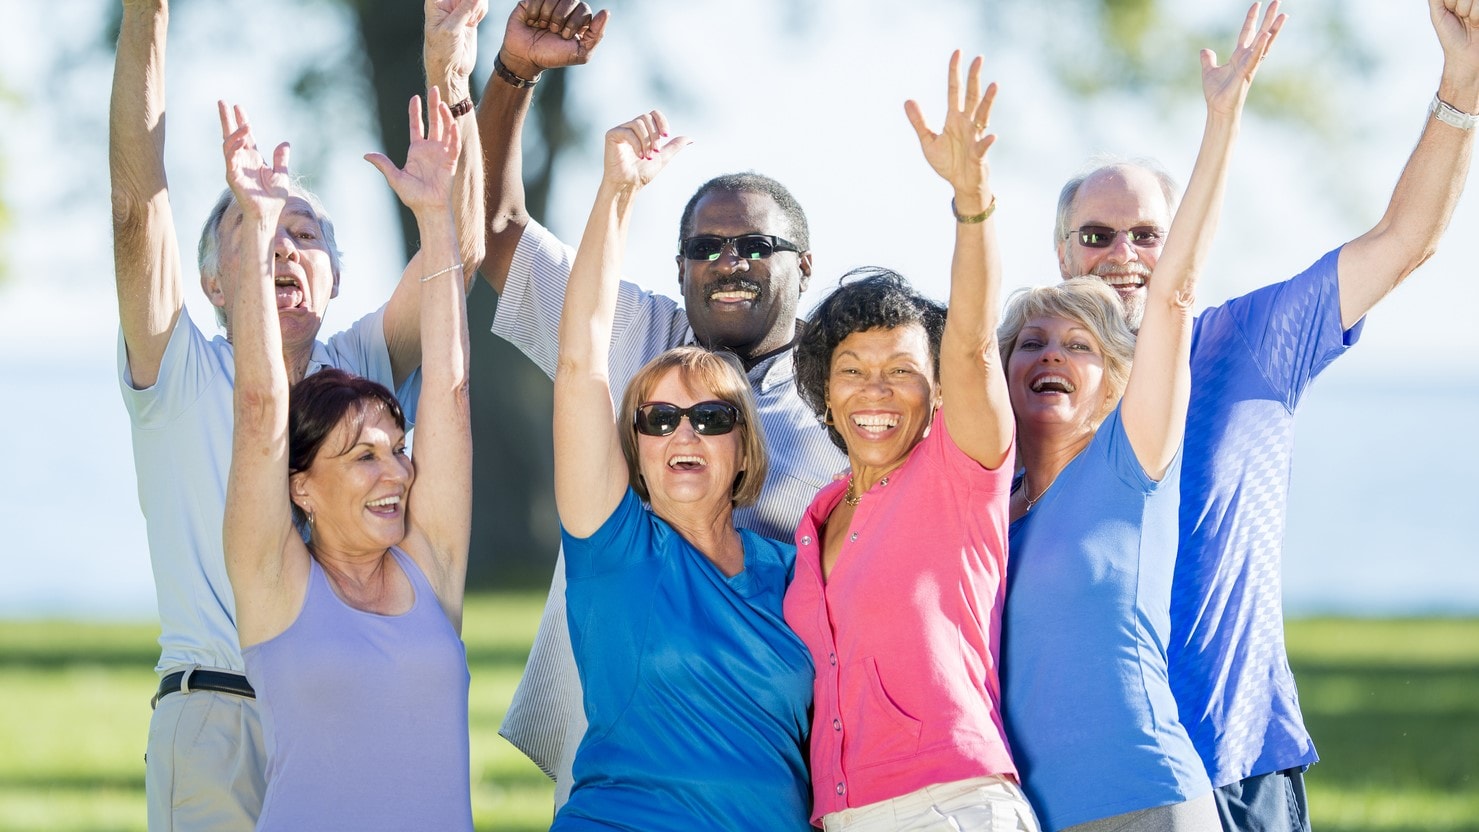 Group of happy older adults outside with hands in the air